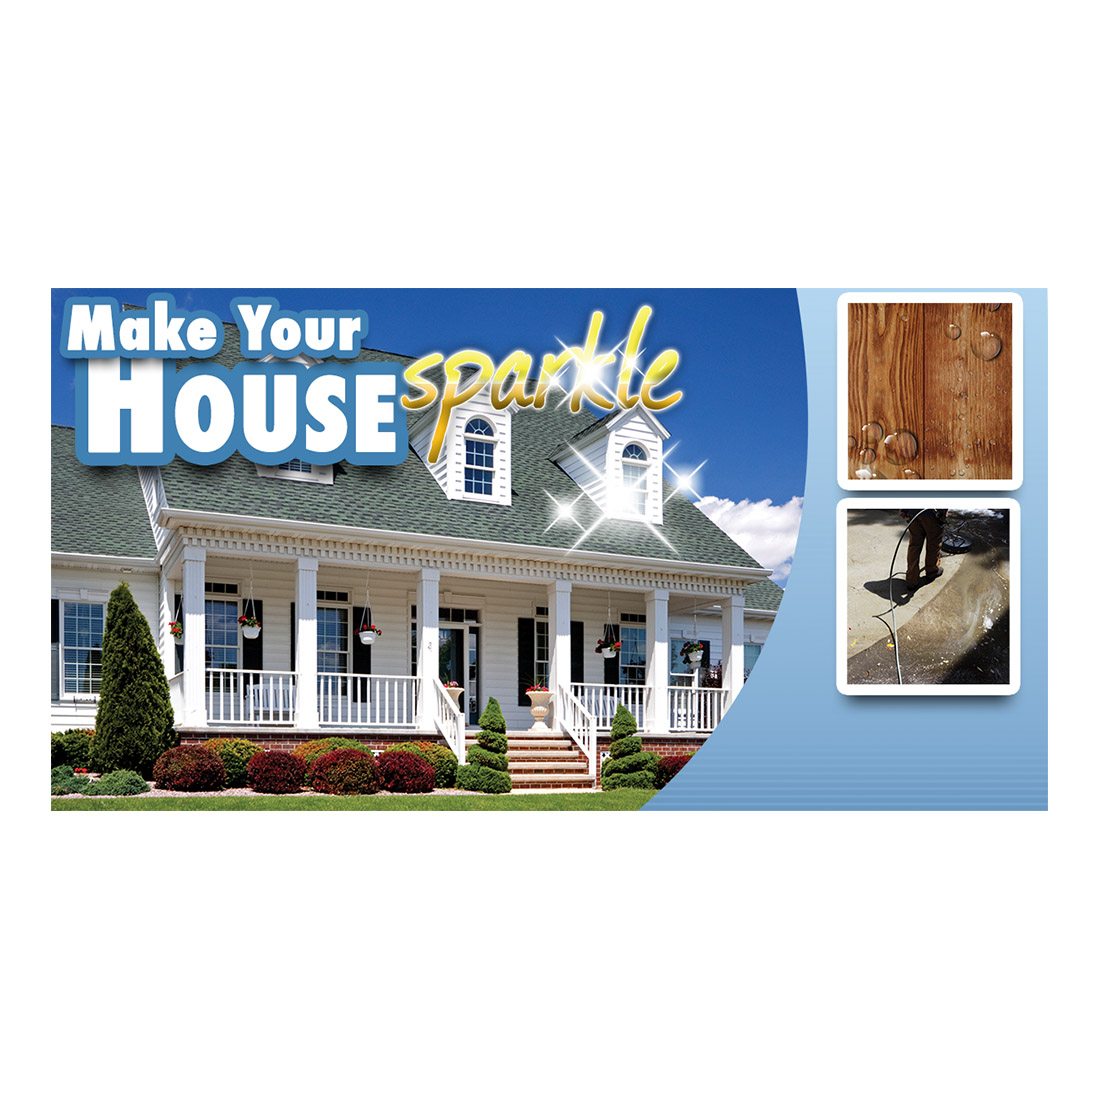 Make Your House Sparkle Facebook Ad